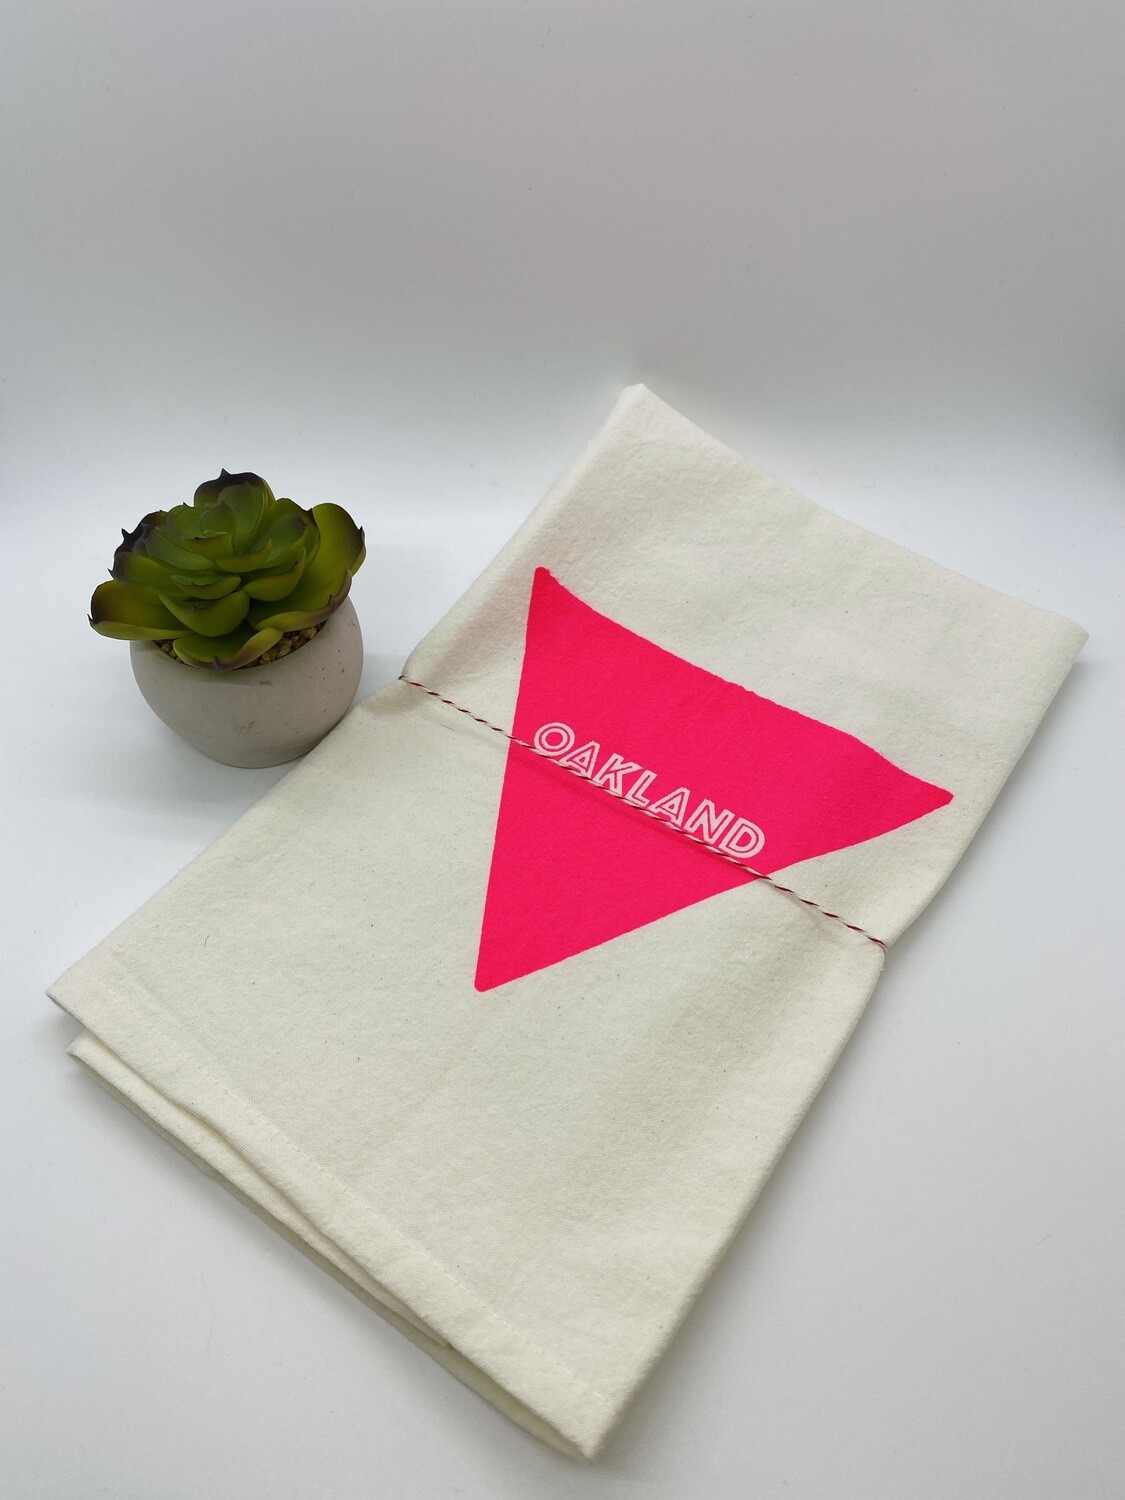 SALE - Pink Triangle Oakland - Hot Pink Towel